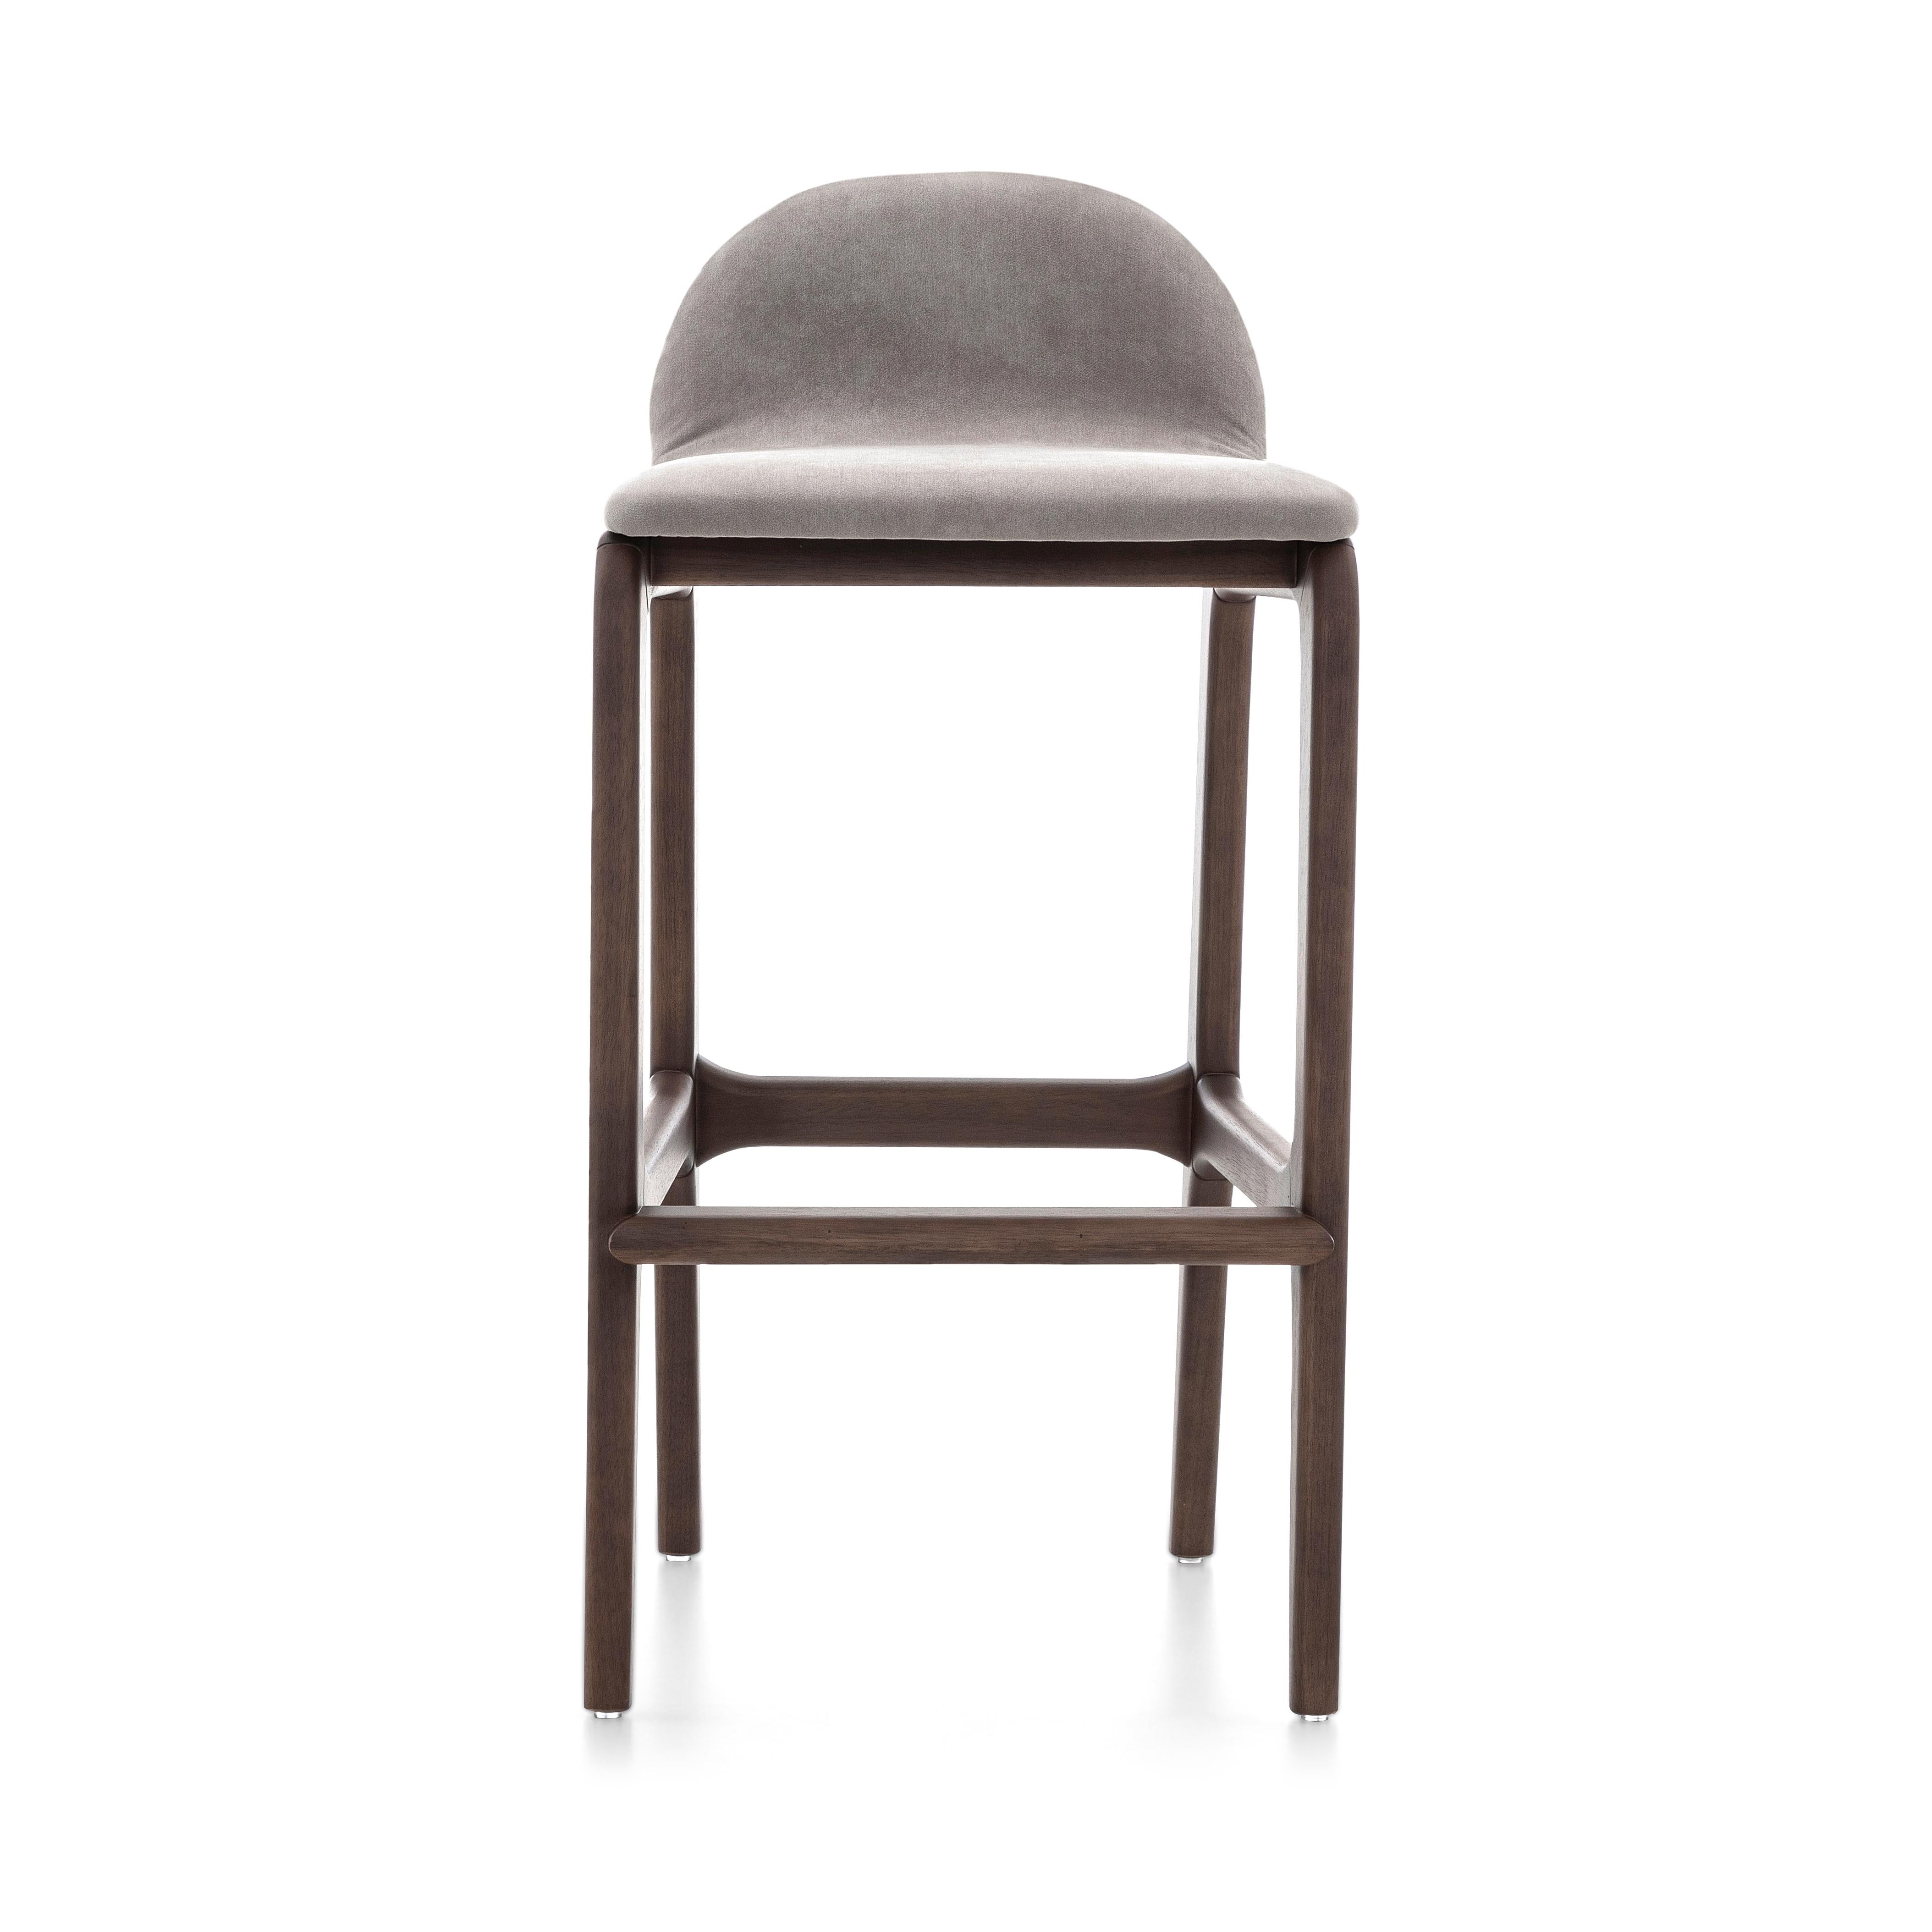 Ura Counter Barstool in Walnut Wood Finish Base and Upholstered Light Brown Seat In New Condition For Sale In Miami, FL